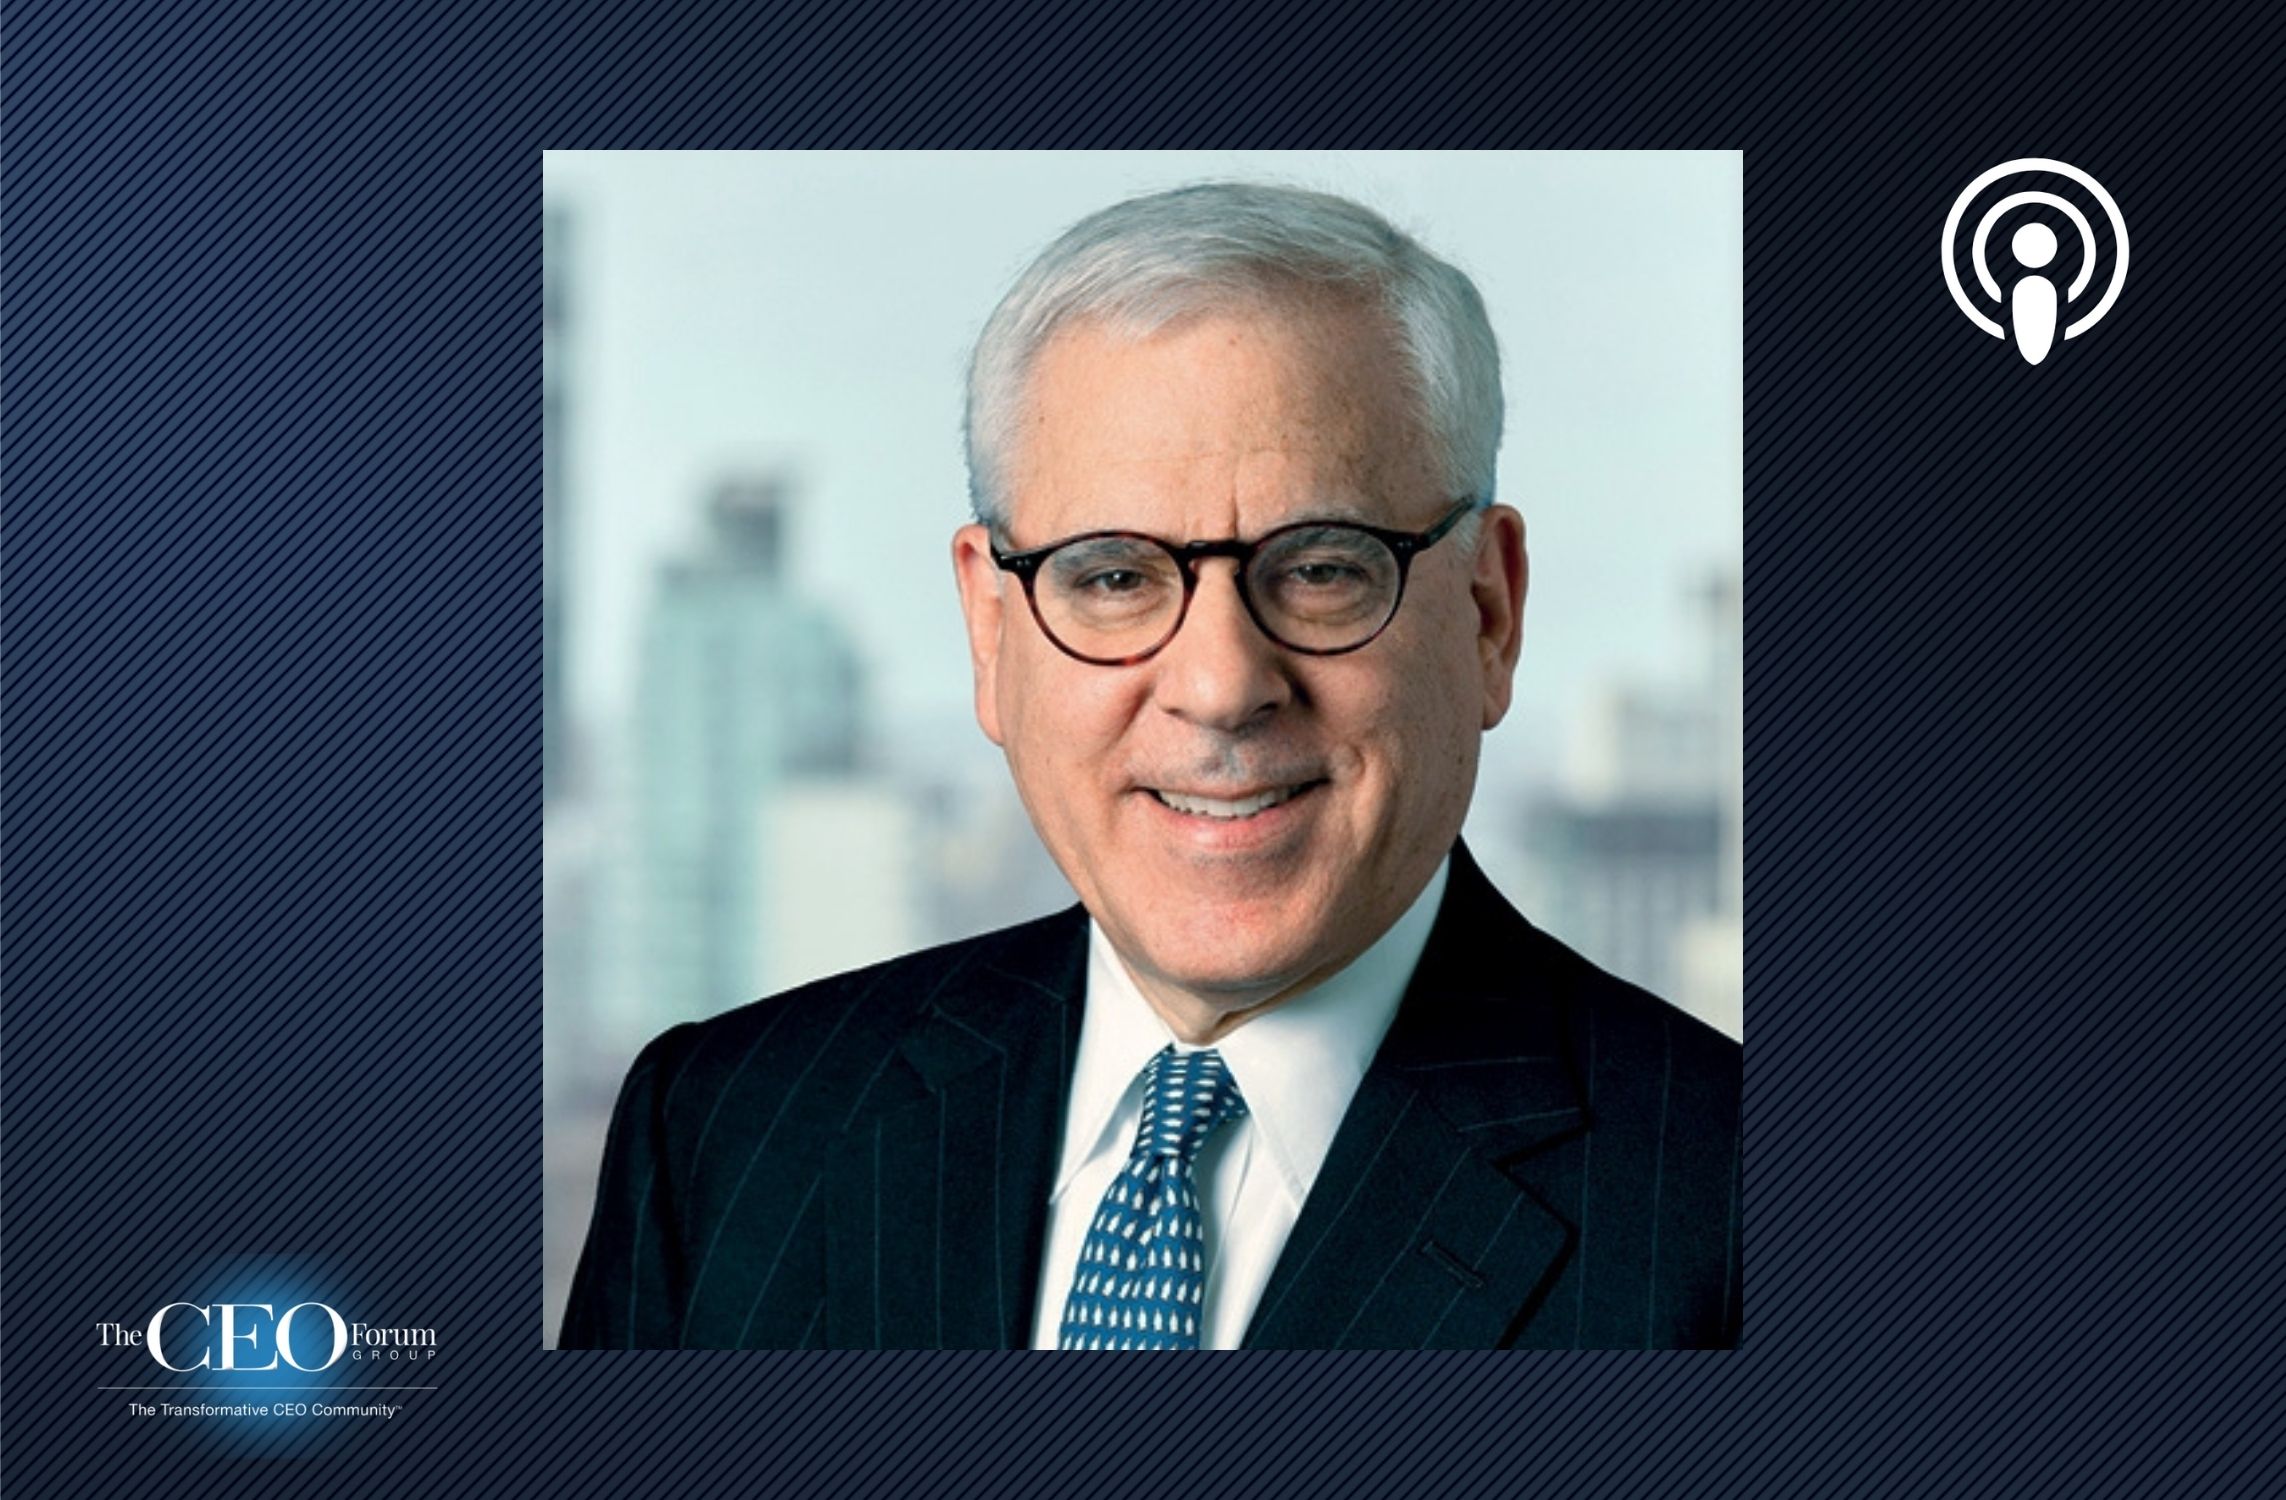 David Rubenstein, Co-Founder and Co-Chairman, The Carlyle Group (07/06/2021)